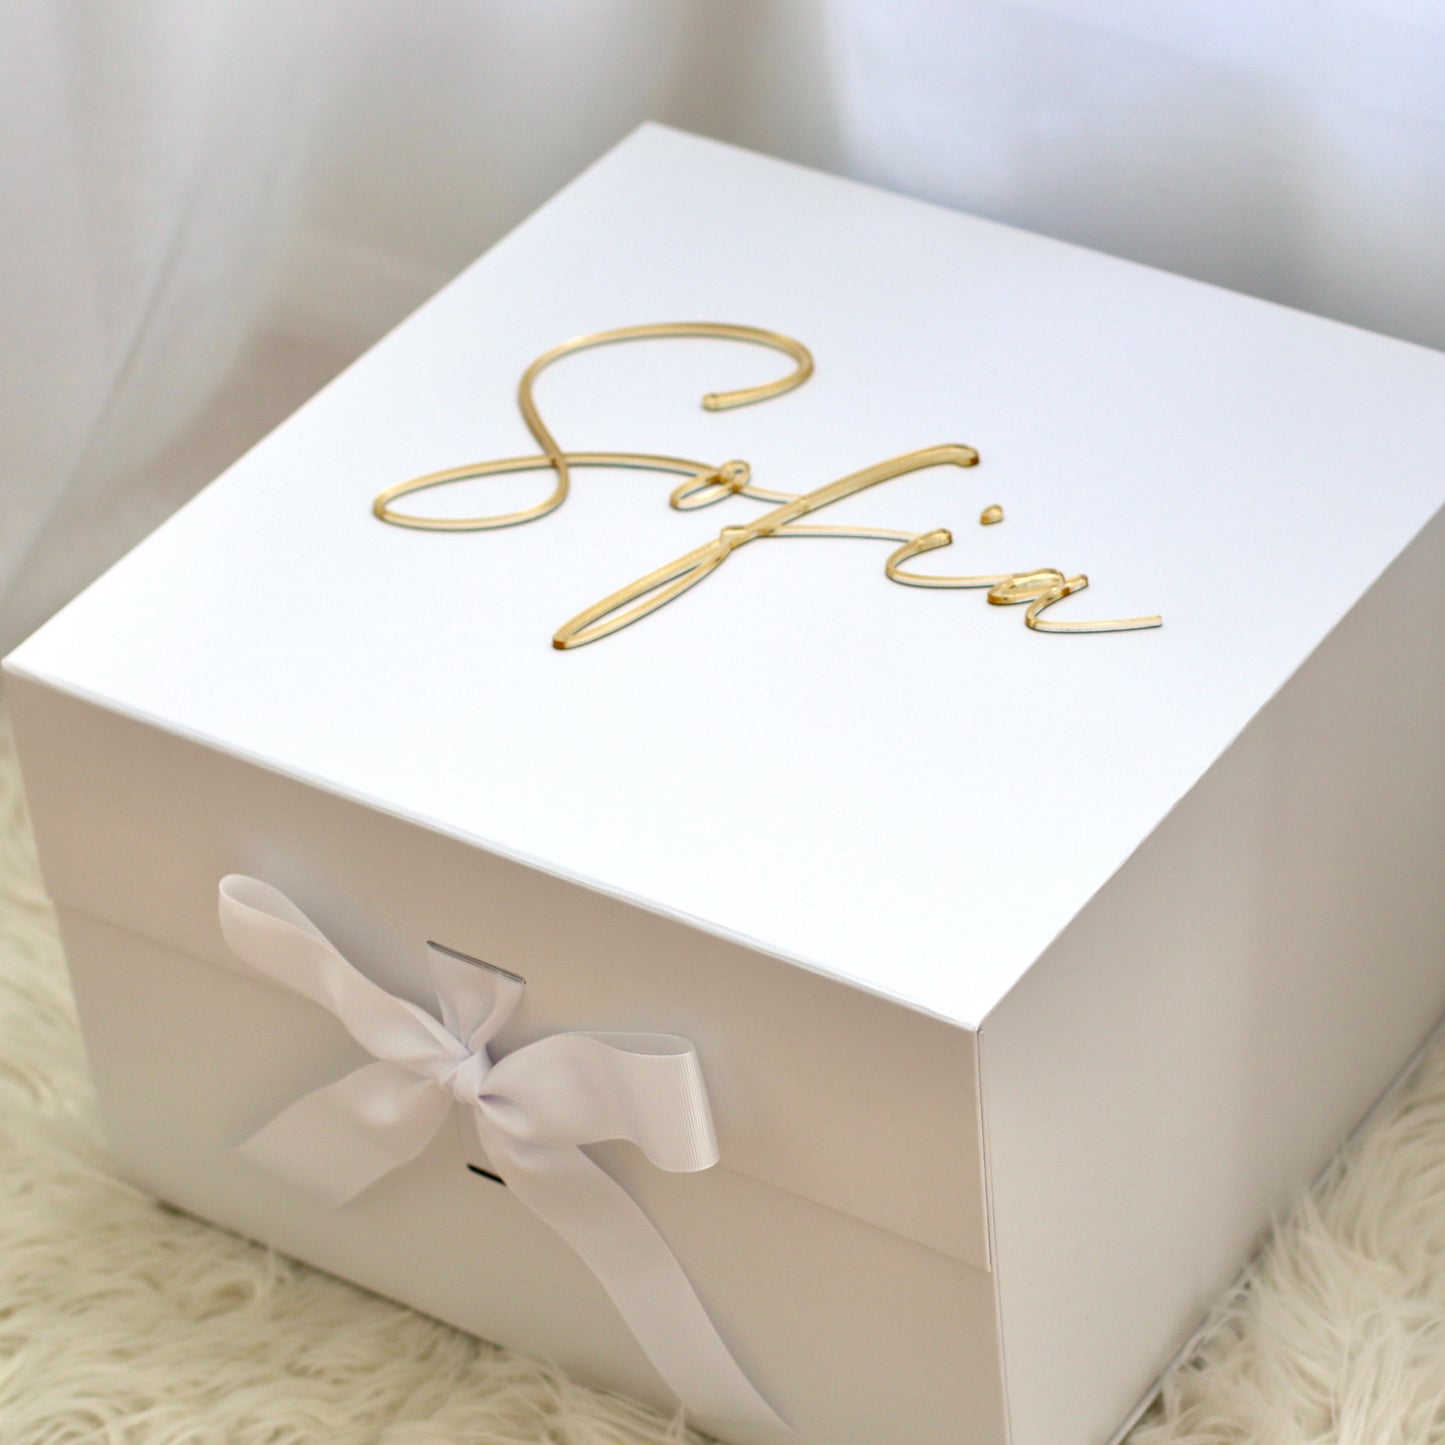 A sturdy, rigid collapsible gift box made from 2.8mm (approx.) board and covered with a bright white paper inside and a protective matte laminate coating inside and out. Makes any gift a delightful surprise for any recipient.